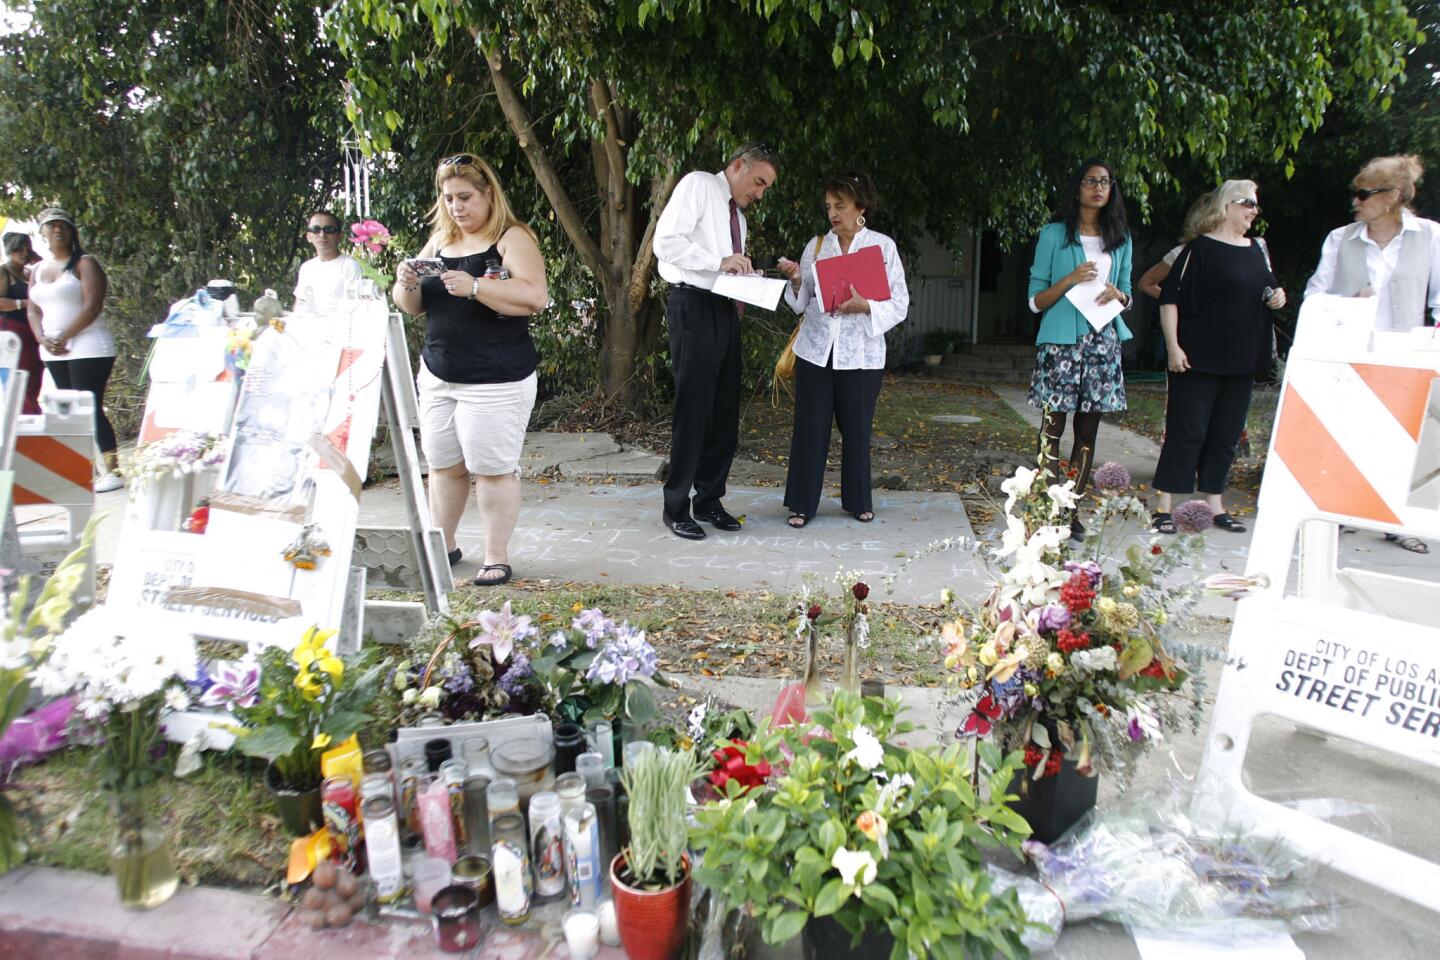 Families and friends of the victims of last week's electrocution accident attend a press conference where the accident happened on Ben Ave. and Magnolia Blvd. in Valley Village on August 22, 2012.